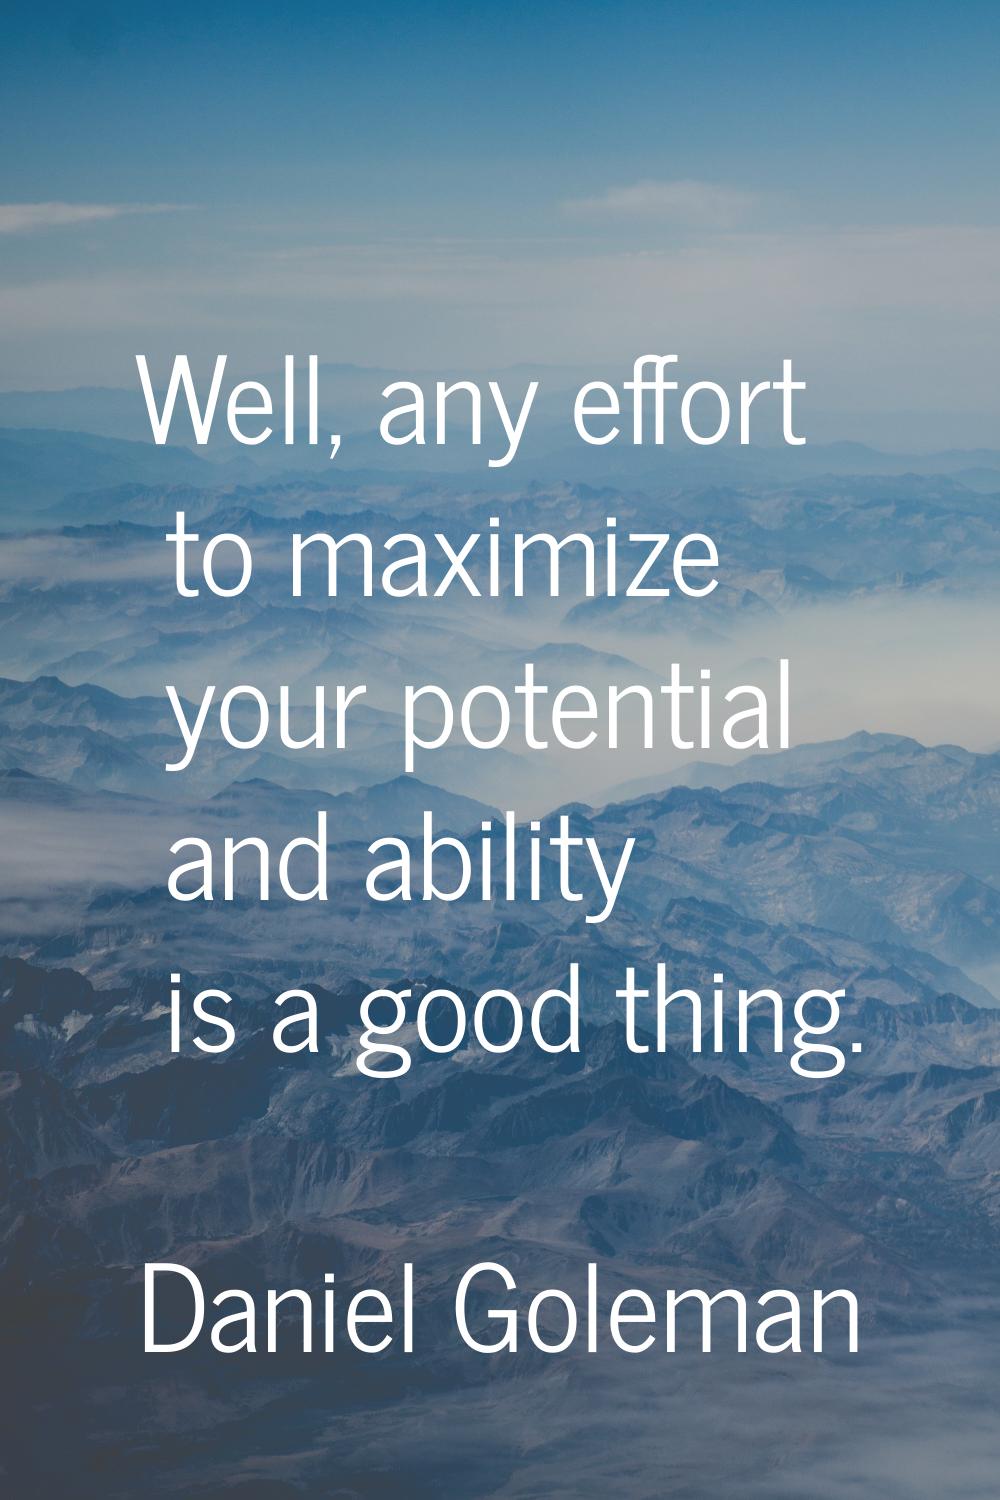 Well, any effort to maximize your potential and ability is a good thing.